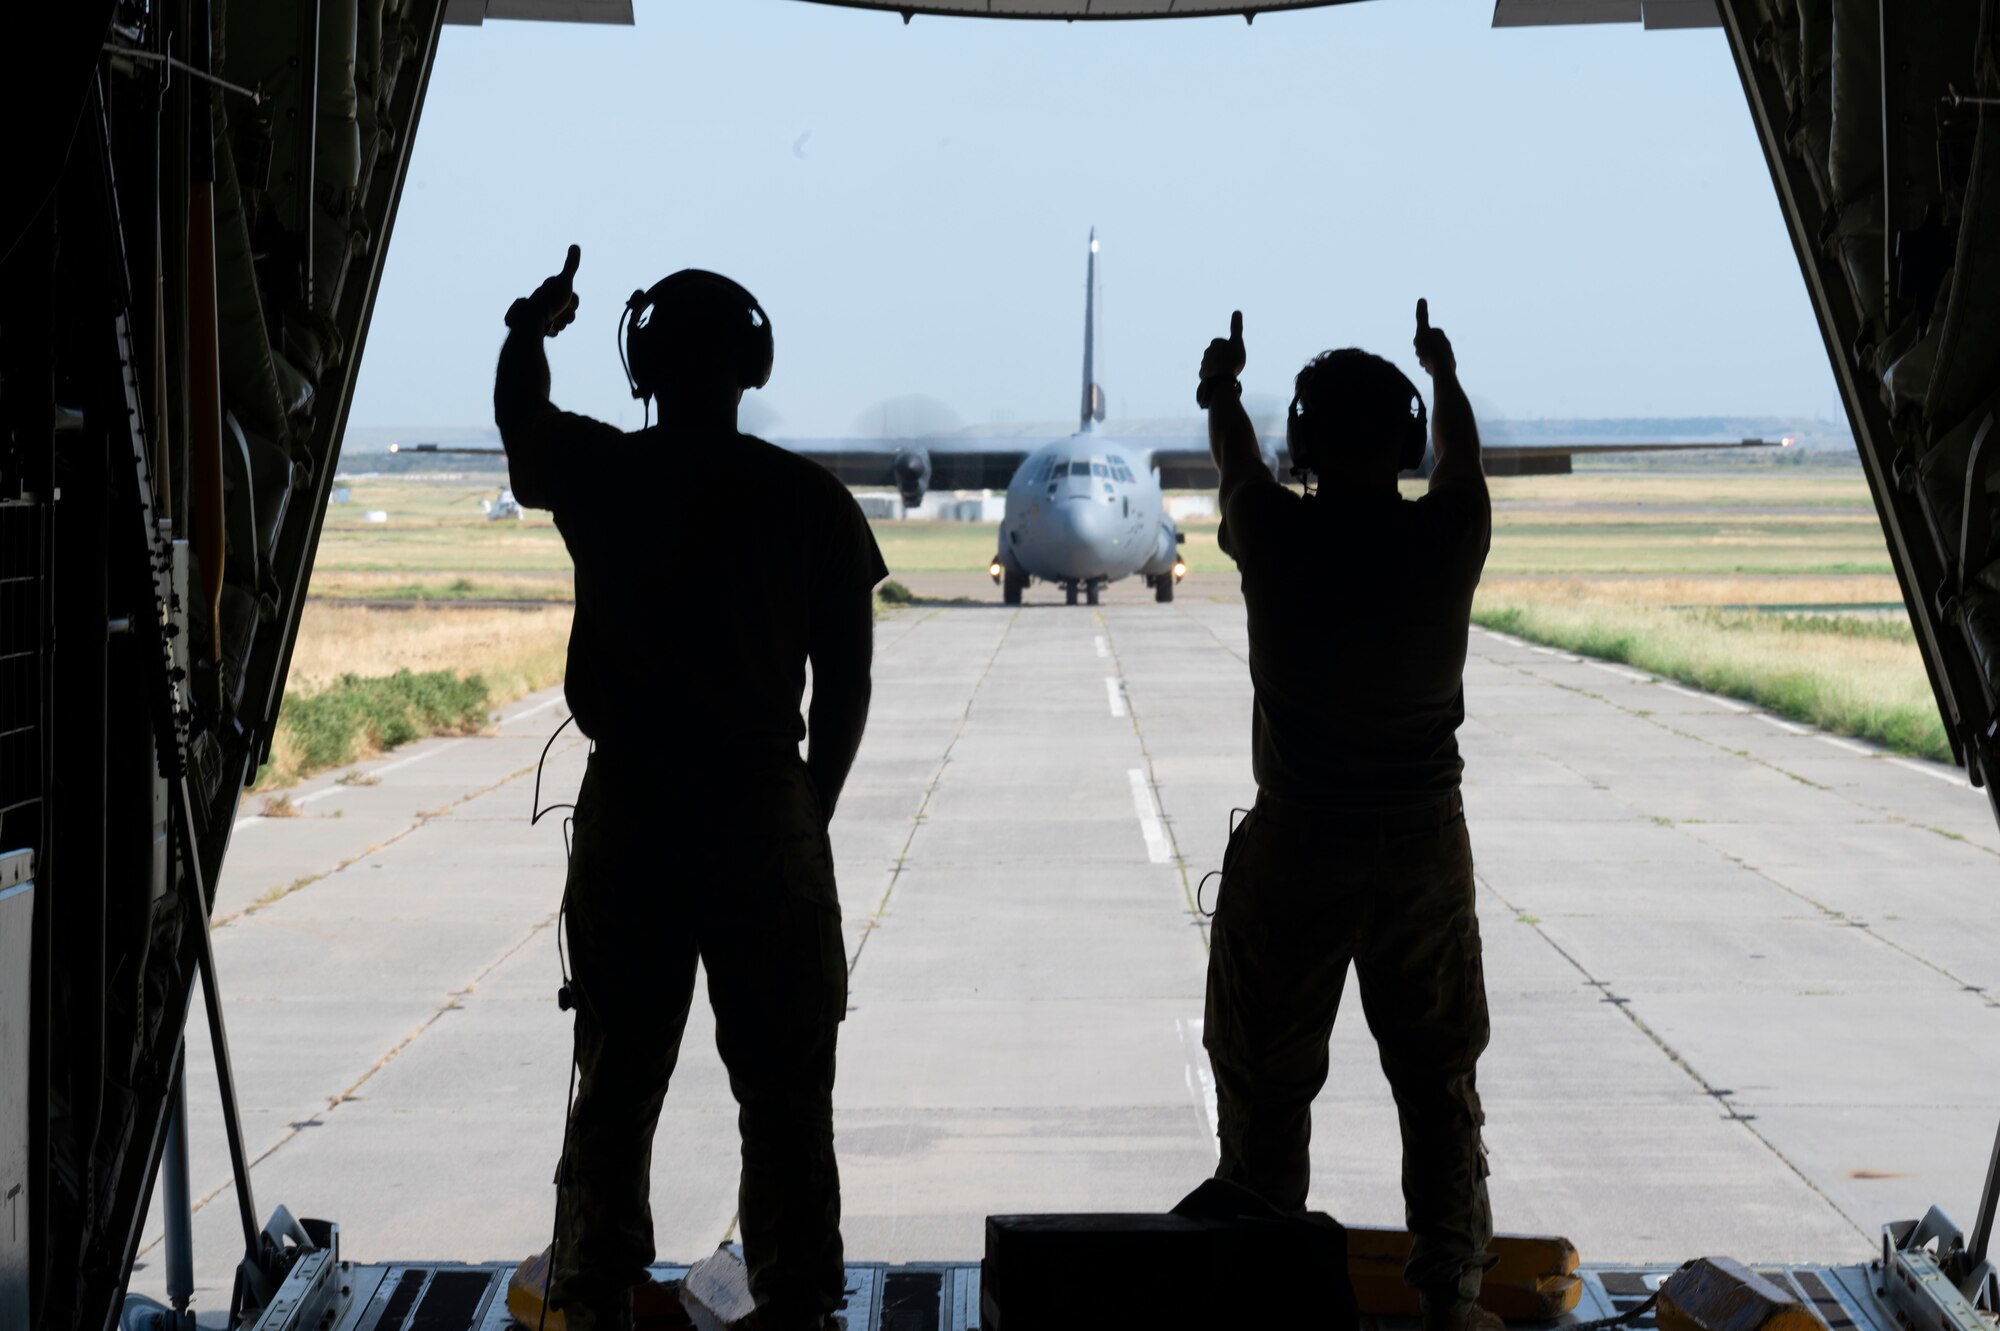 U.S. Air Force Tech. Sgt. Mario Linton, 37th Airlift Squadron loadmaster, left, and Senior Airman Robert Kucholtz, 37th AS loadmaster, give a thumbs up to the 37th AS pilots of a U.S. Air Force C-130J Super Hercules aircraft during exercise Agile Spirit 21